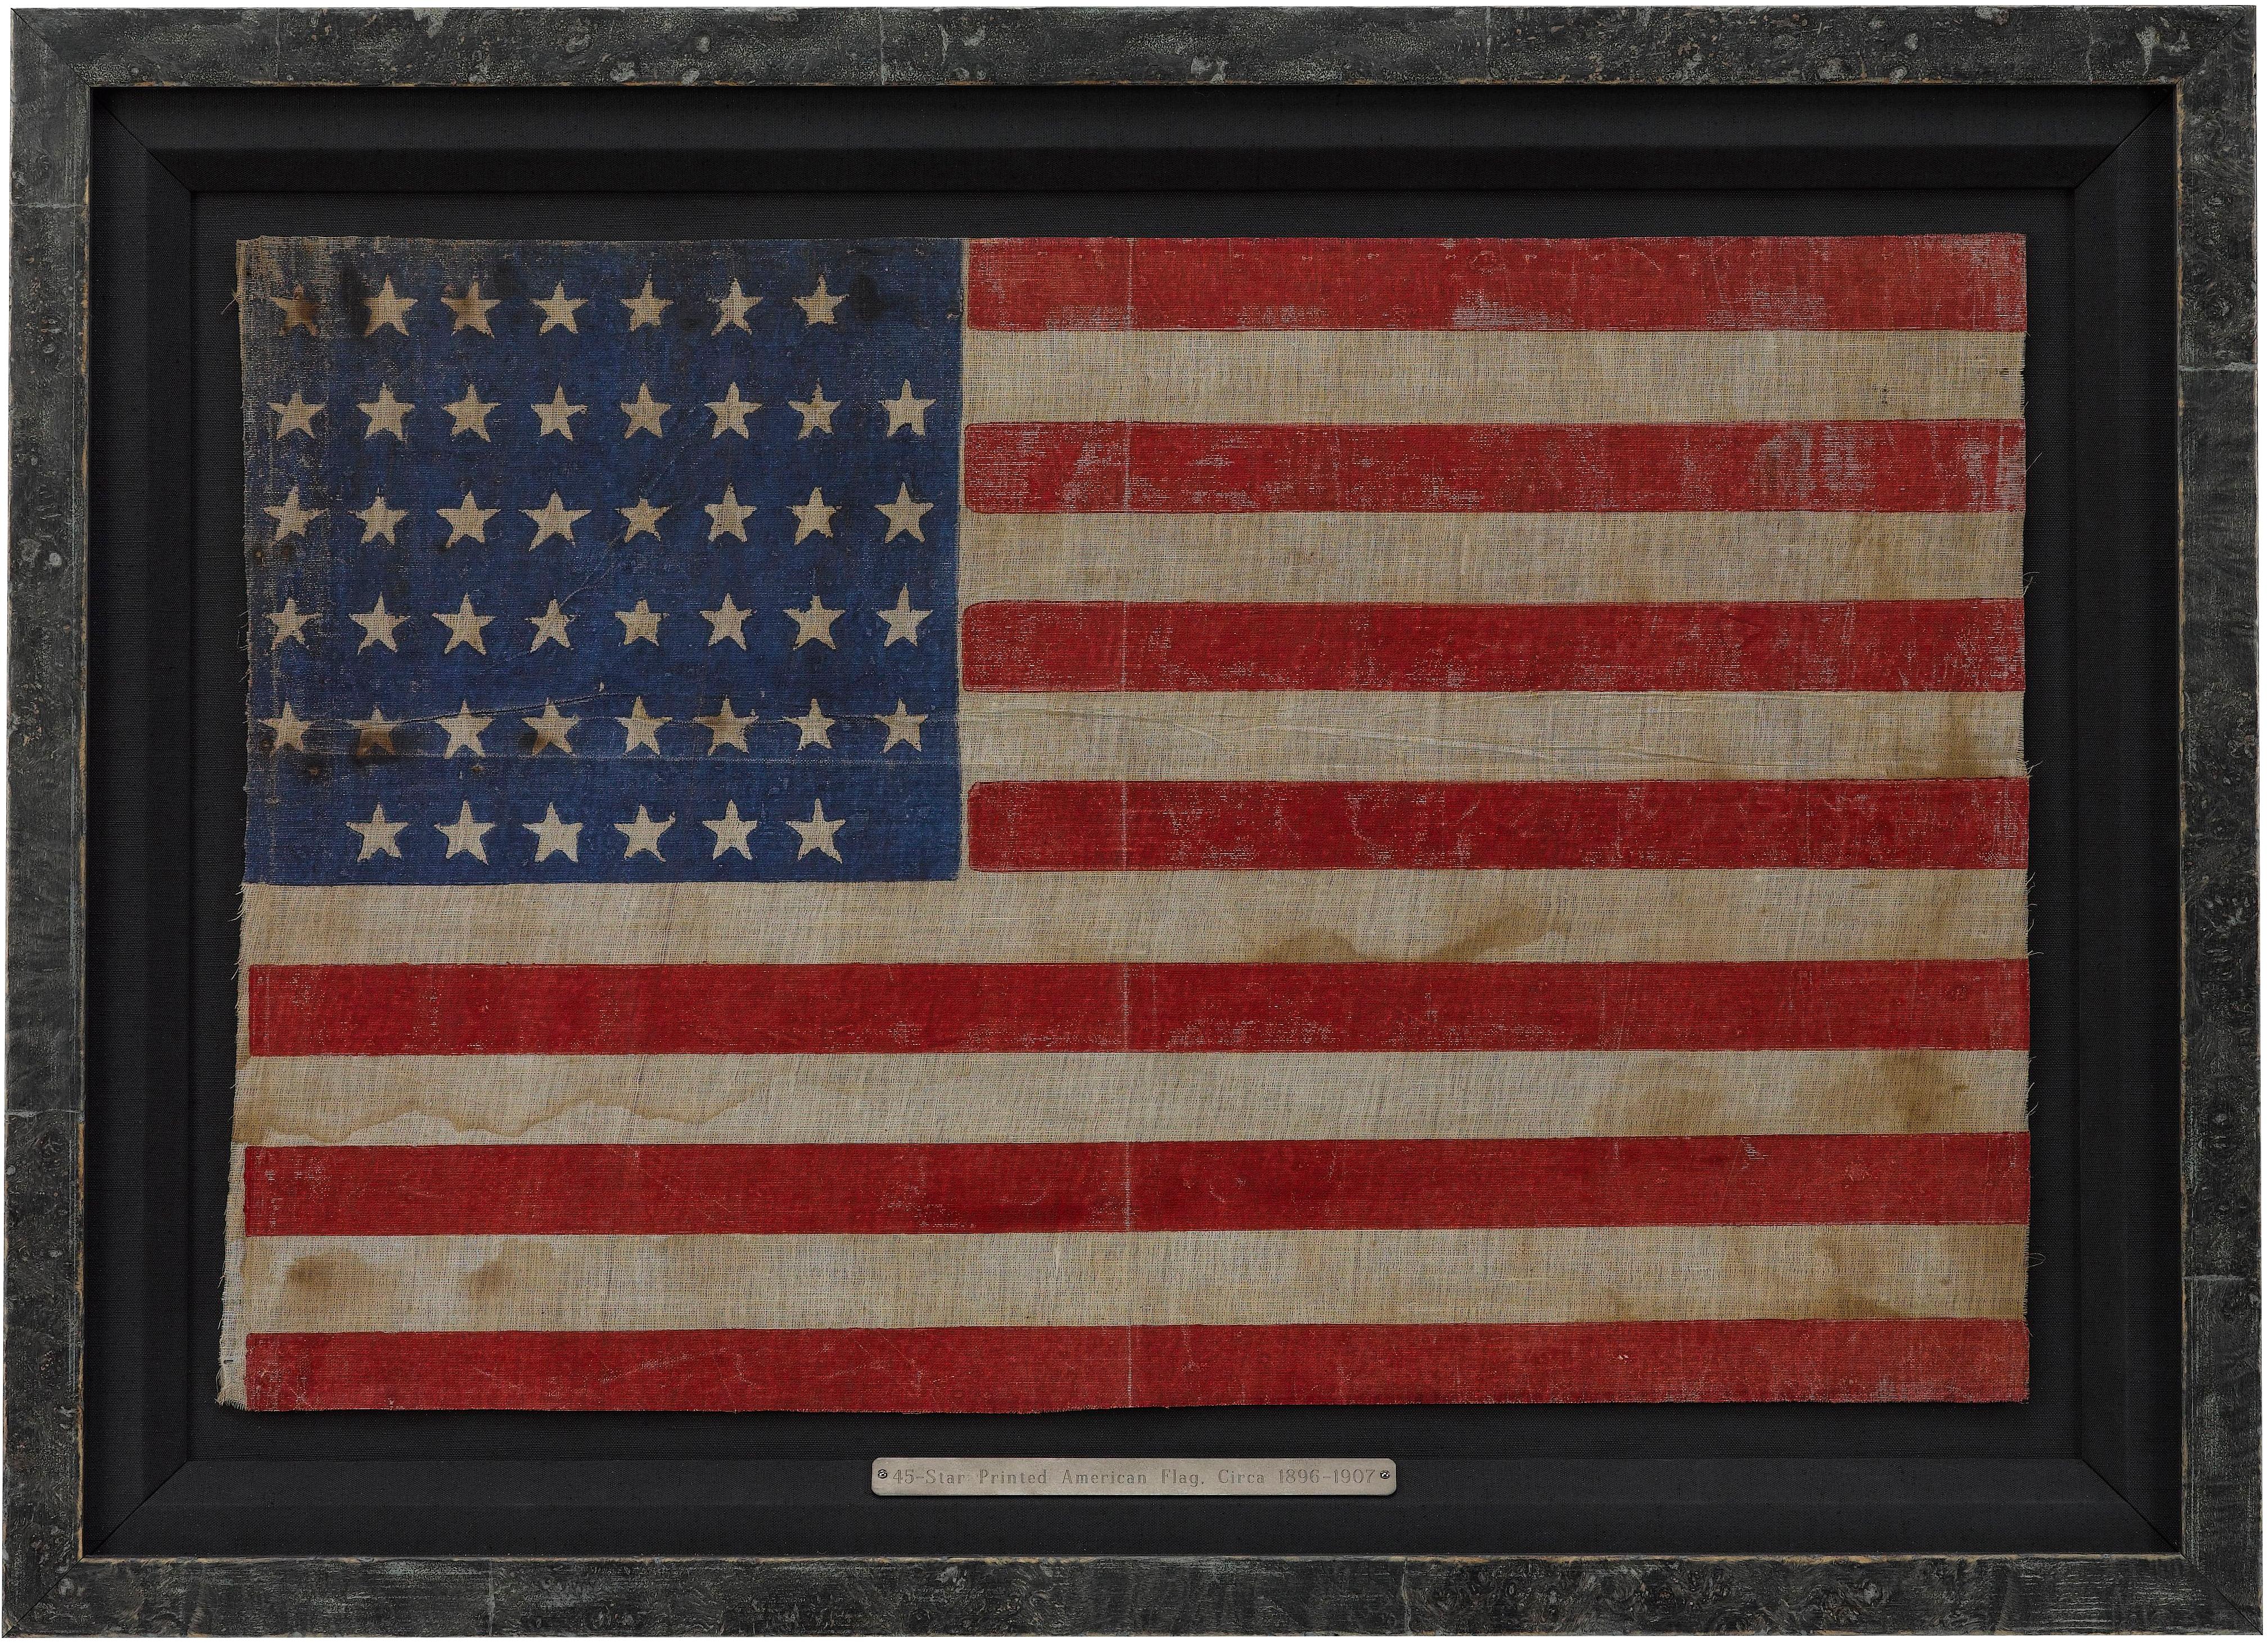 This 45-star United States flag celebrates the statehood of Utah. 45-star flags served as the official American flag from 1896-1908. The flag is printed on muslin and was flown as a parade flag. The stars on the flag’s canton are printed in “drum”